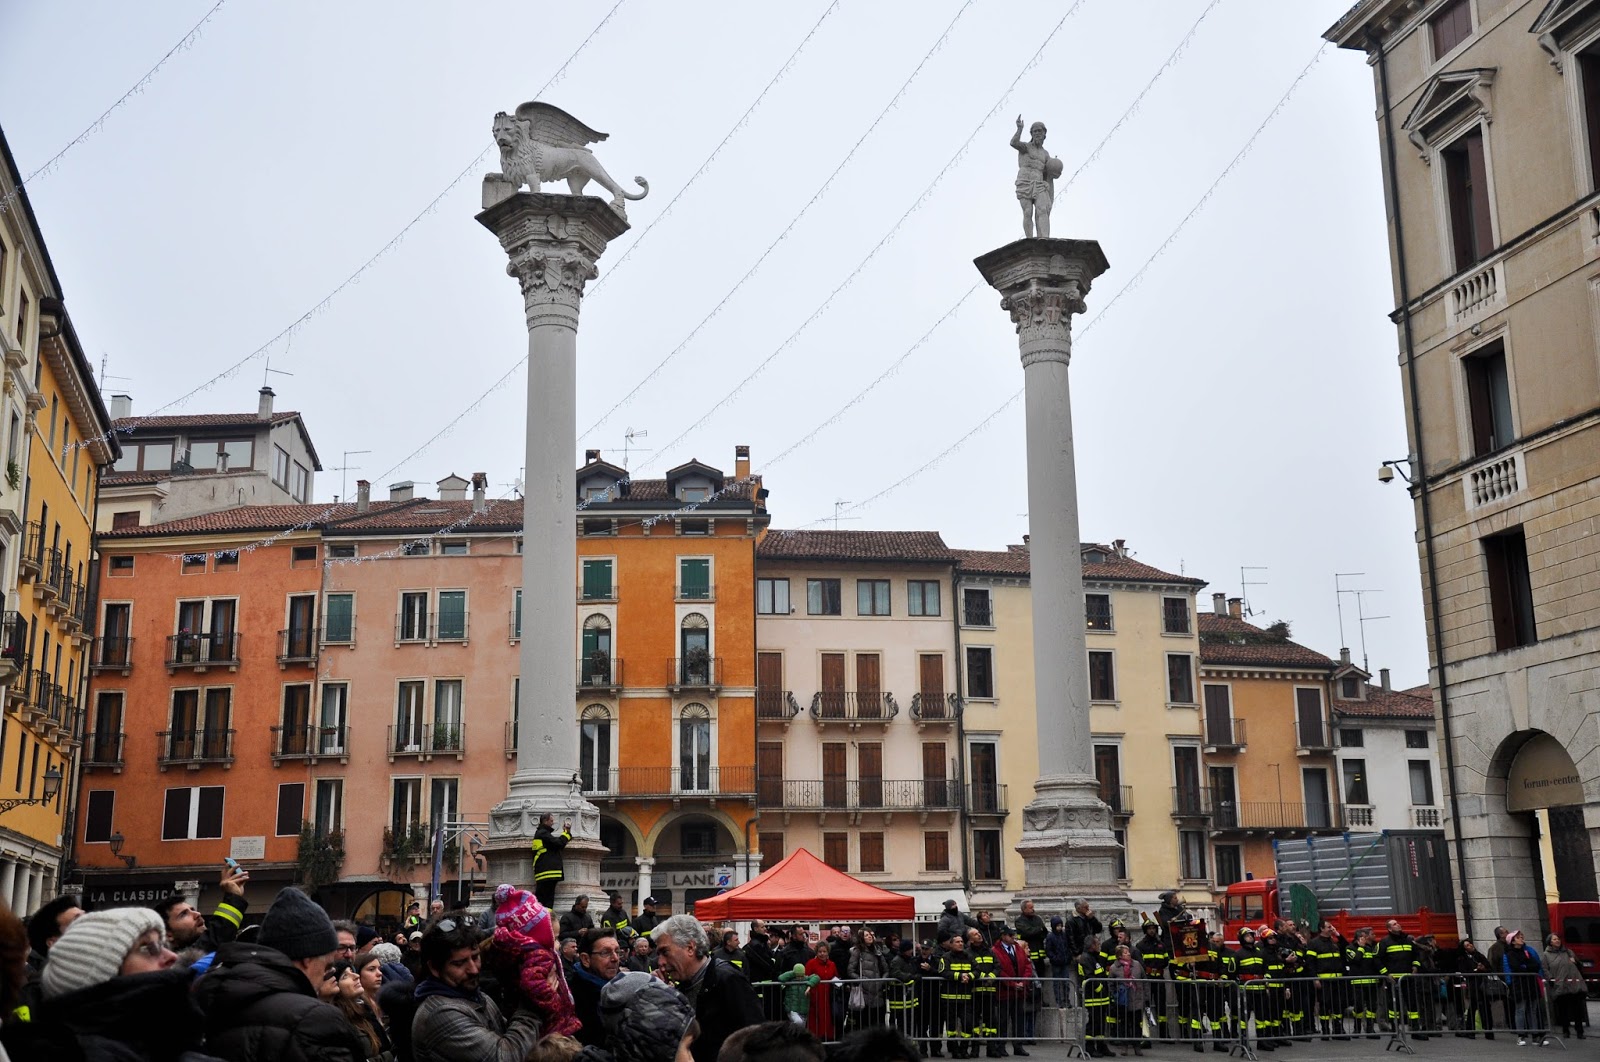 The crowd watching the demonstration of the firefigters on Piazza dei Signori, Saint Barbara celebration, Vicenza, Veneto, Italy